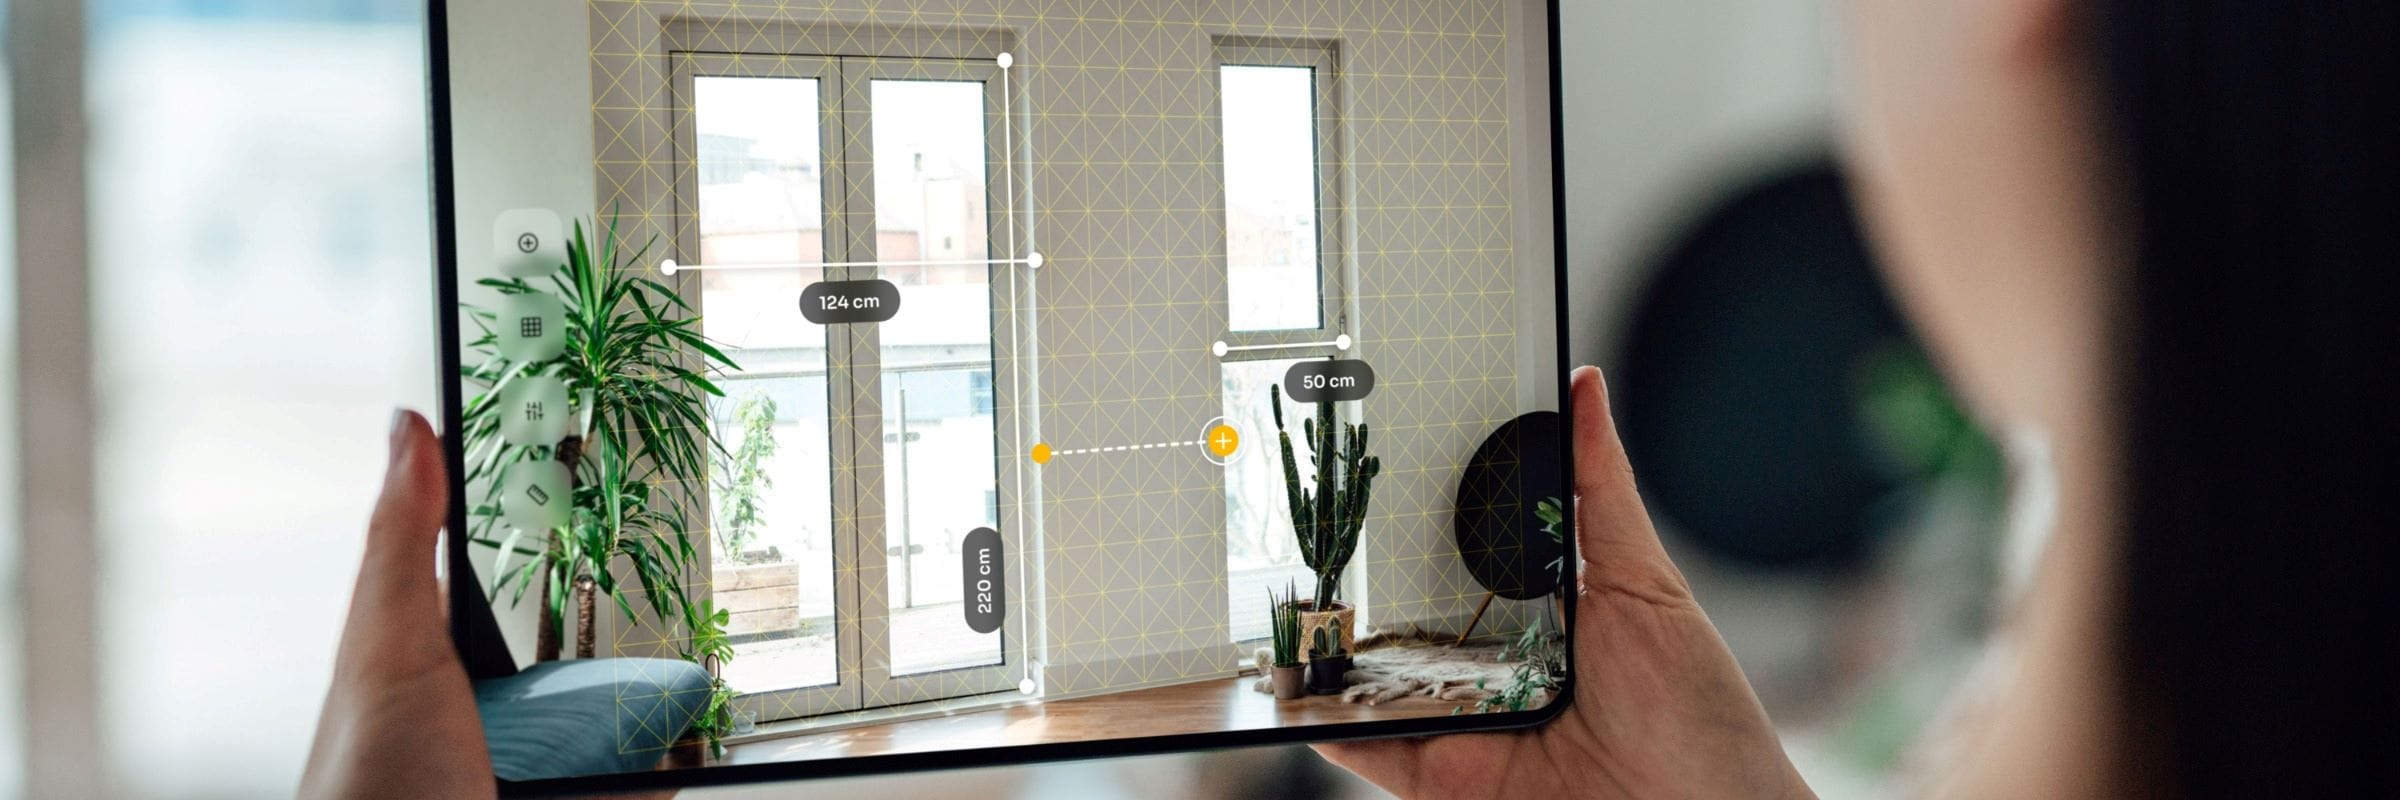 Over the shoulder view of young woman using Augmented Reality technology to measure dimensions of home interior on digital tablet.